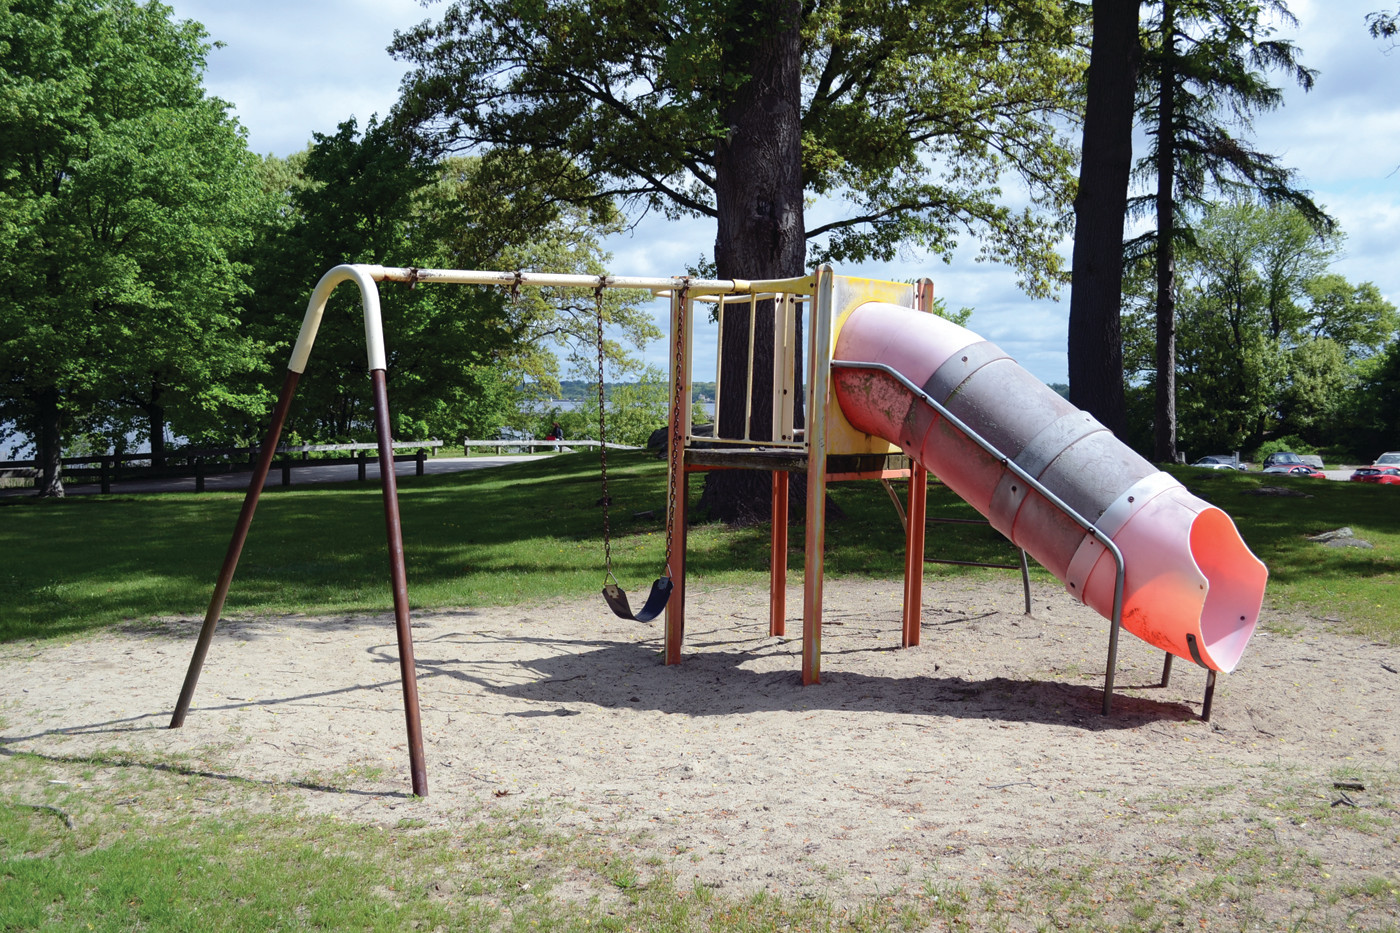 DUE FOR AN UPGRADE: The recreational equipment at Salter Grove, which Ward 1 Councilman Richard Corley called “decrepit,” will soon be upgraded thanks to a $100,000 grant award from DEM.